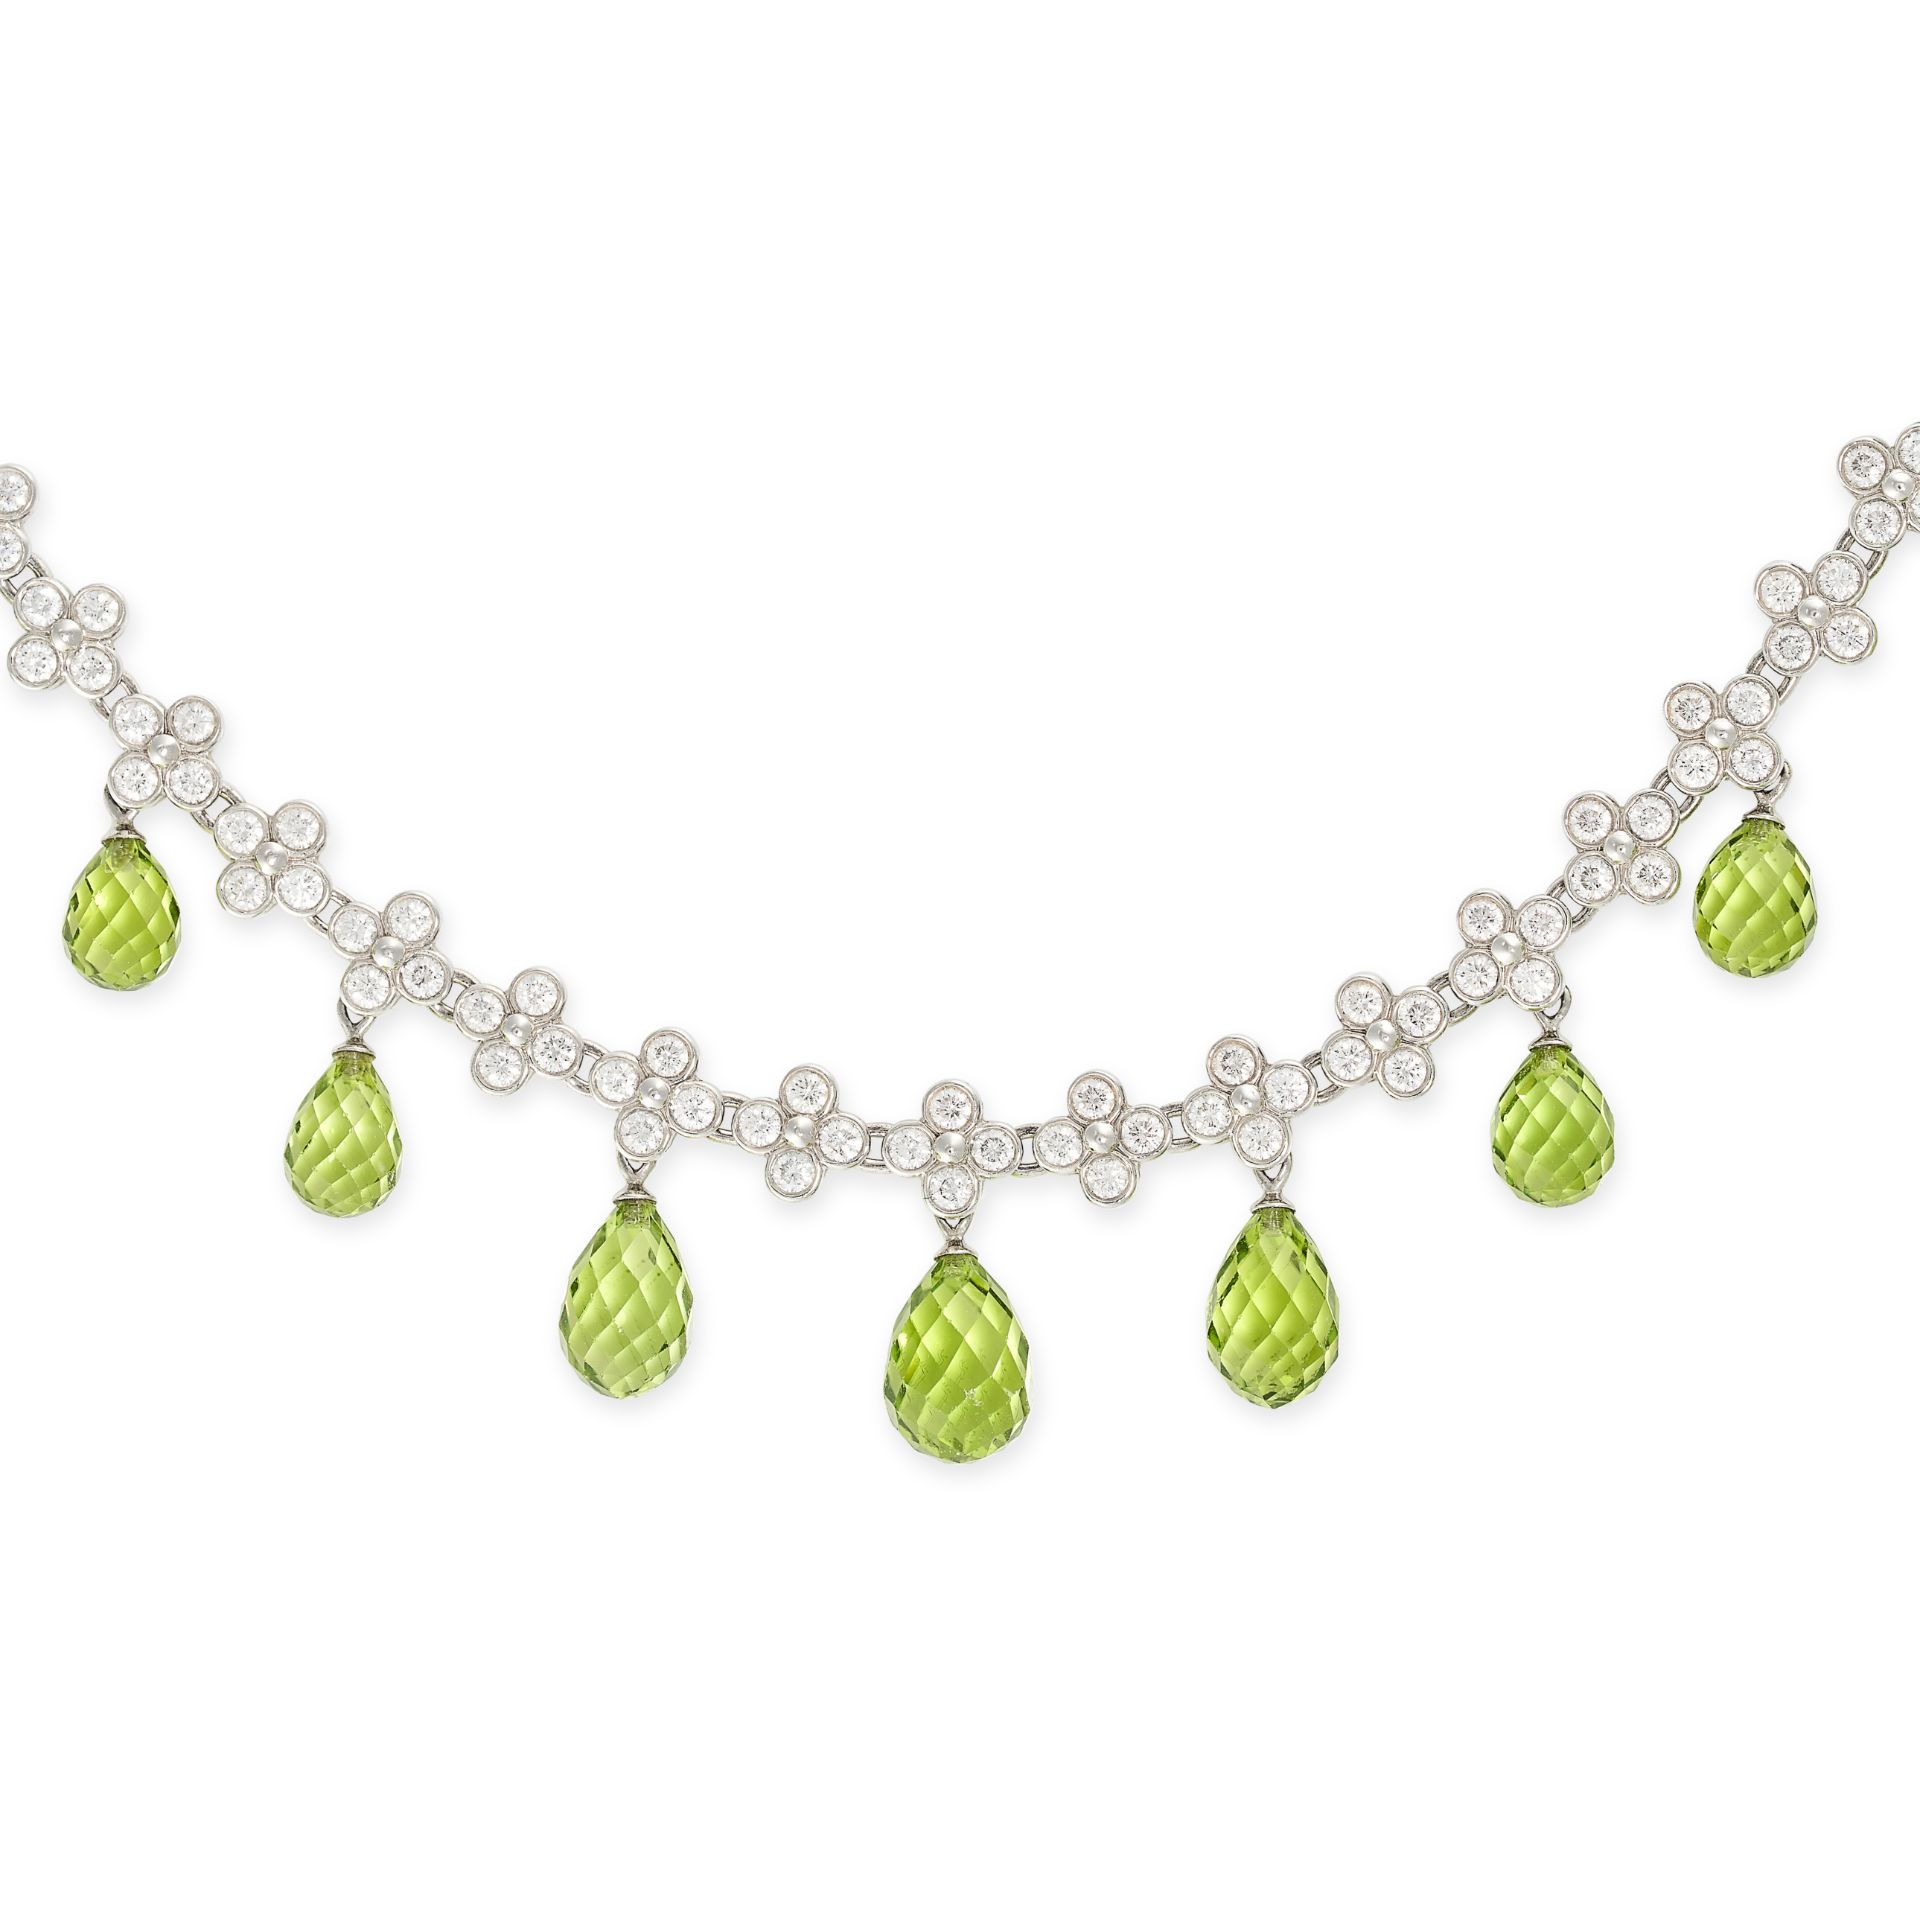 TIFFANY & CO, A PERIDOT AND DIAMOND NECKLACE in platinum, the necklace comprising a row of - Image 2 of 3